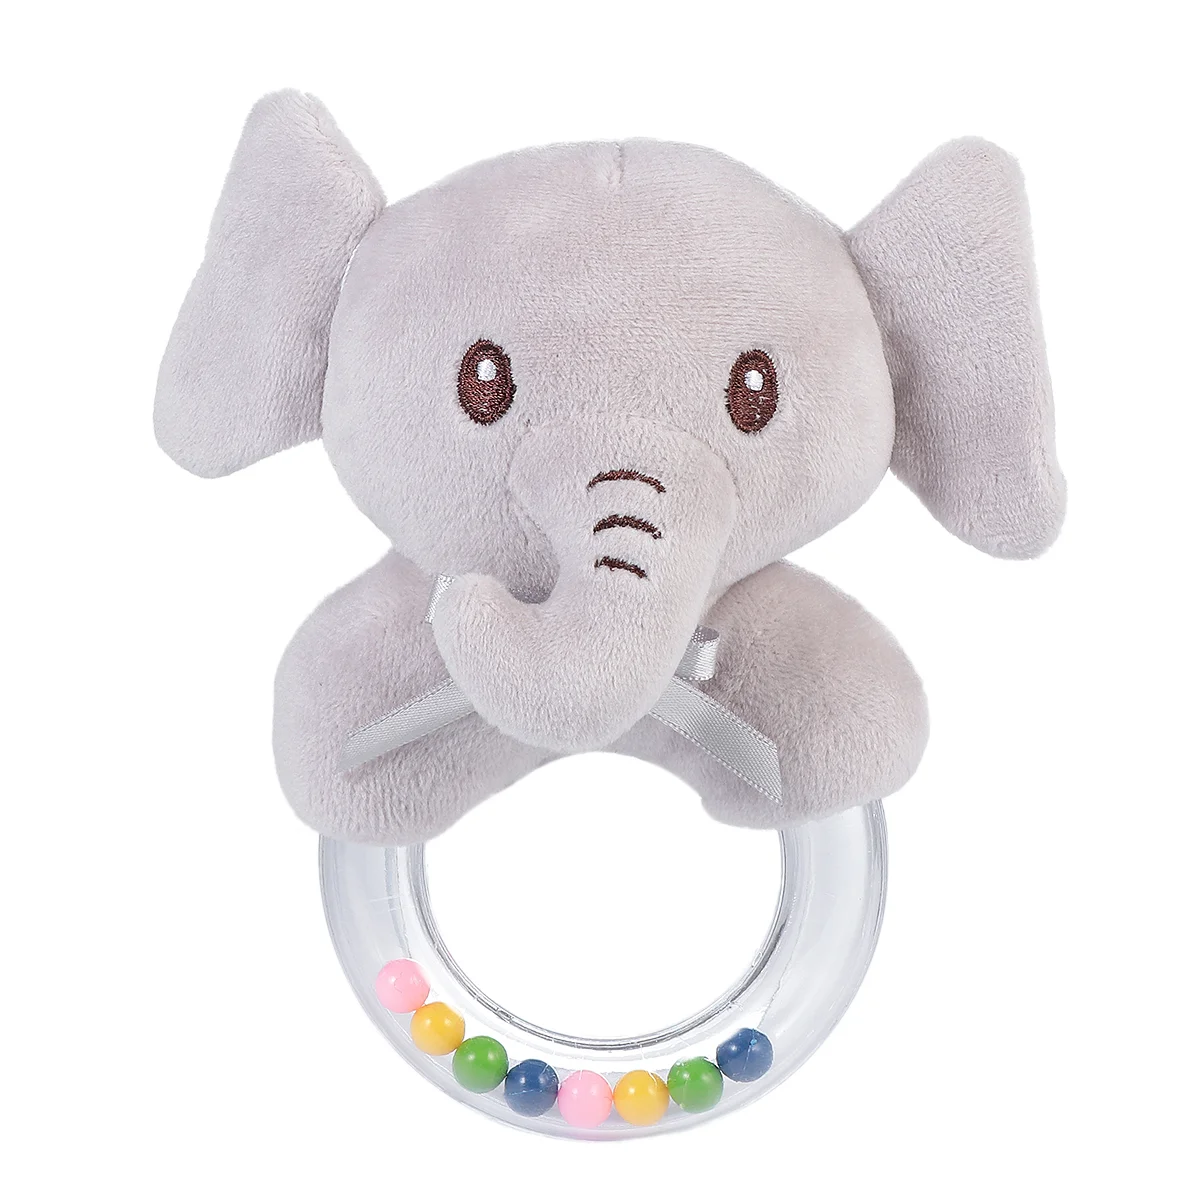 

Hand Ring The Bell Baby Plush Toy Shaker Pacifier Teether Music Grey Elephant Rattles